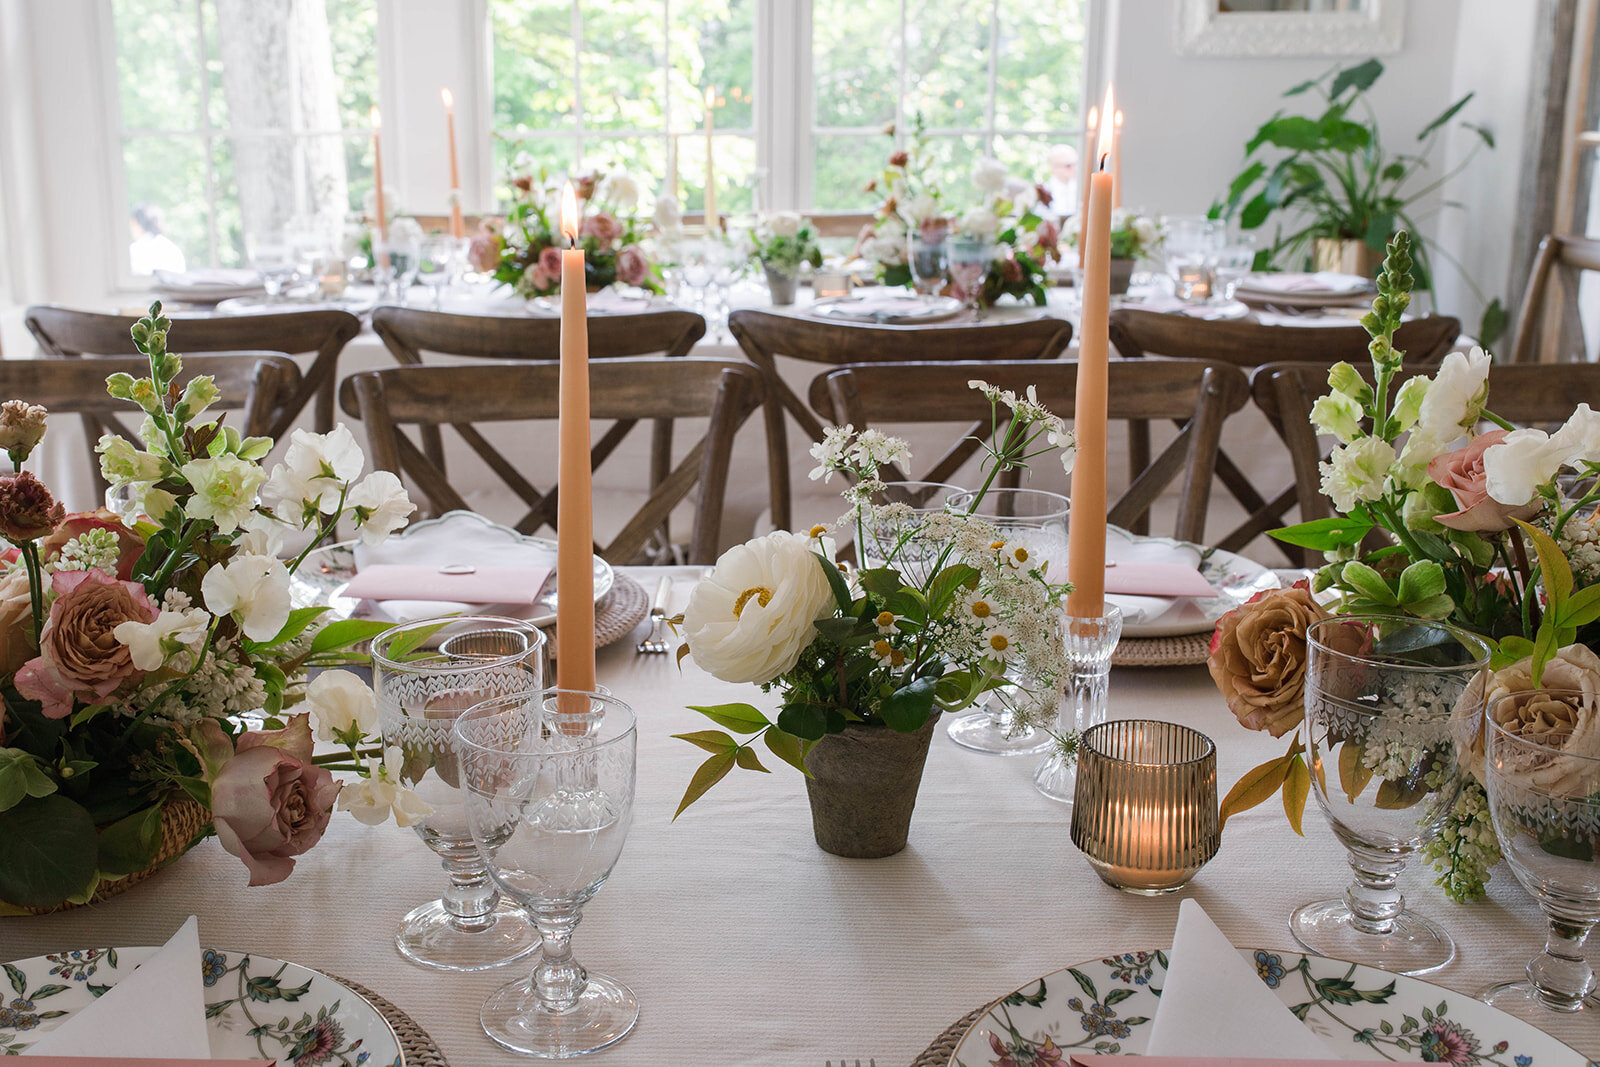 A long table with floral arrangements including white ranunculus, white snapdragons, brown garden roses, white sweet pea, daisies, mauve garden roses, and greenery with sand-stone colored taper candles, amber ribbed votives and vintage glass-ware.